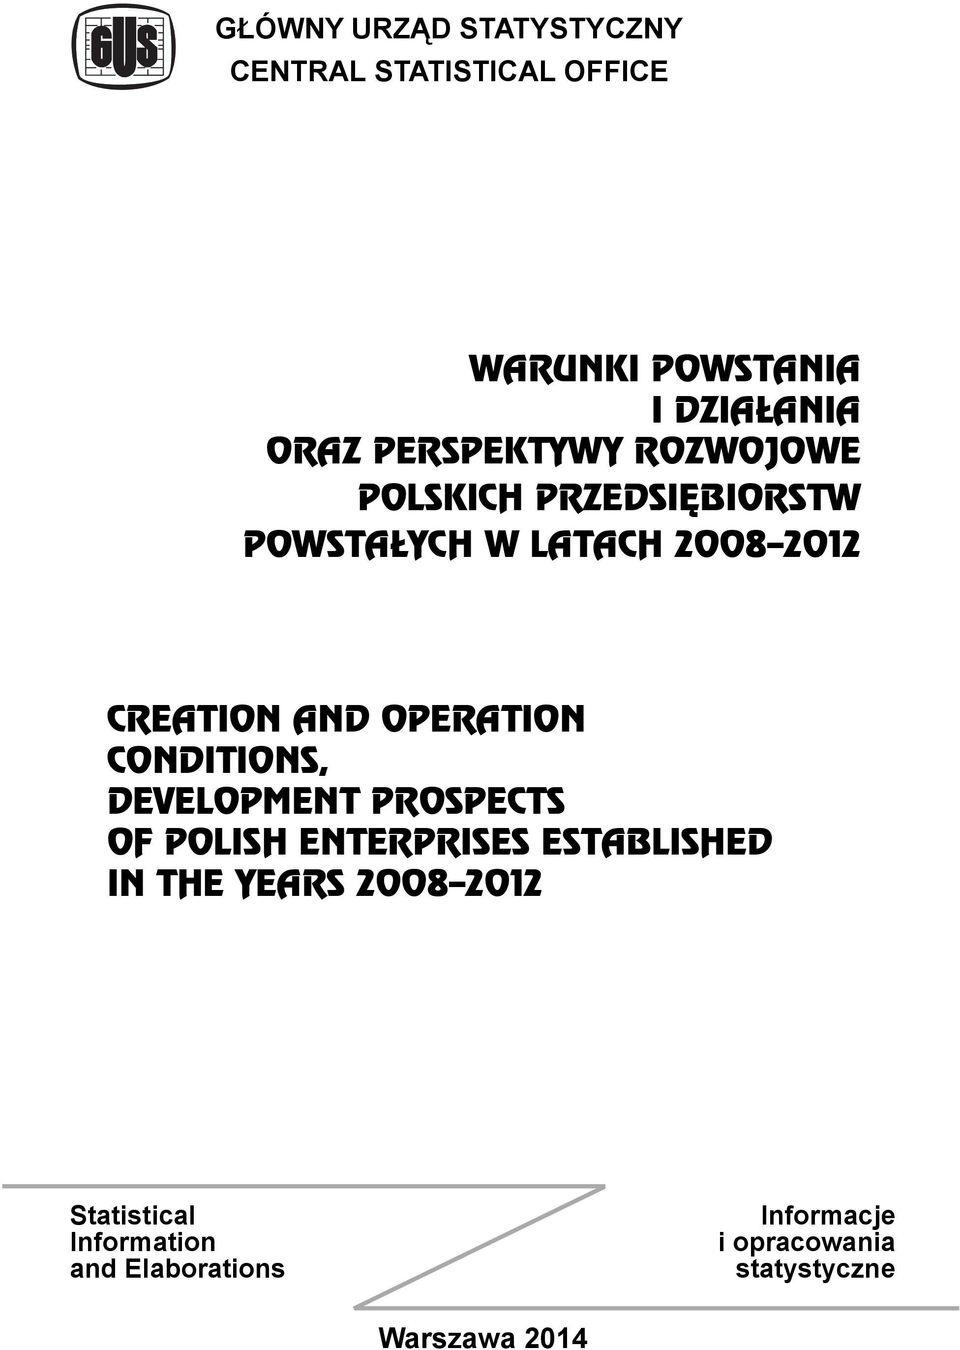 OPERATION CONDITIONS, DEVELOPMENT PROSPECTS OF POLISH ENTERPRISES ESTABLISHED IN THE YEARS